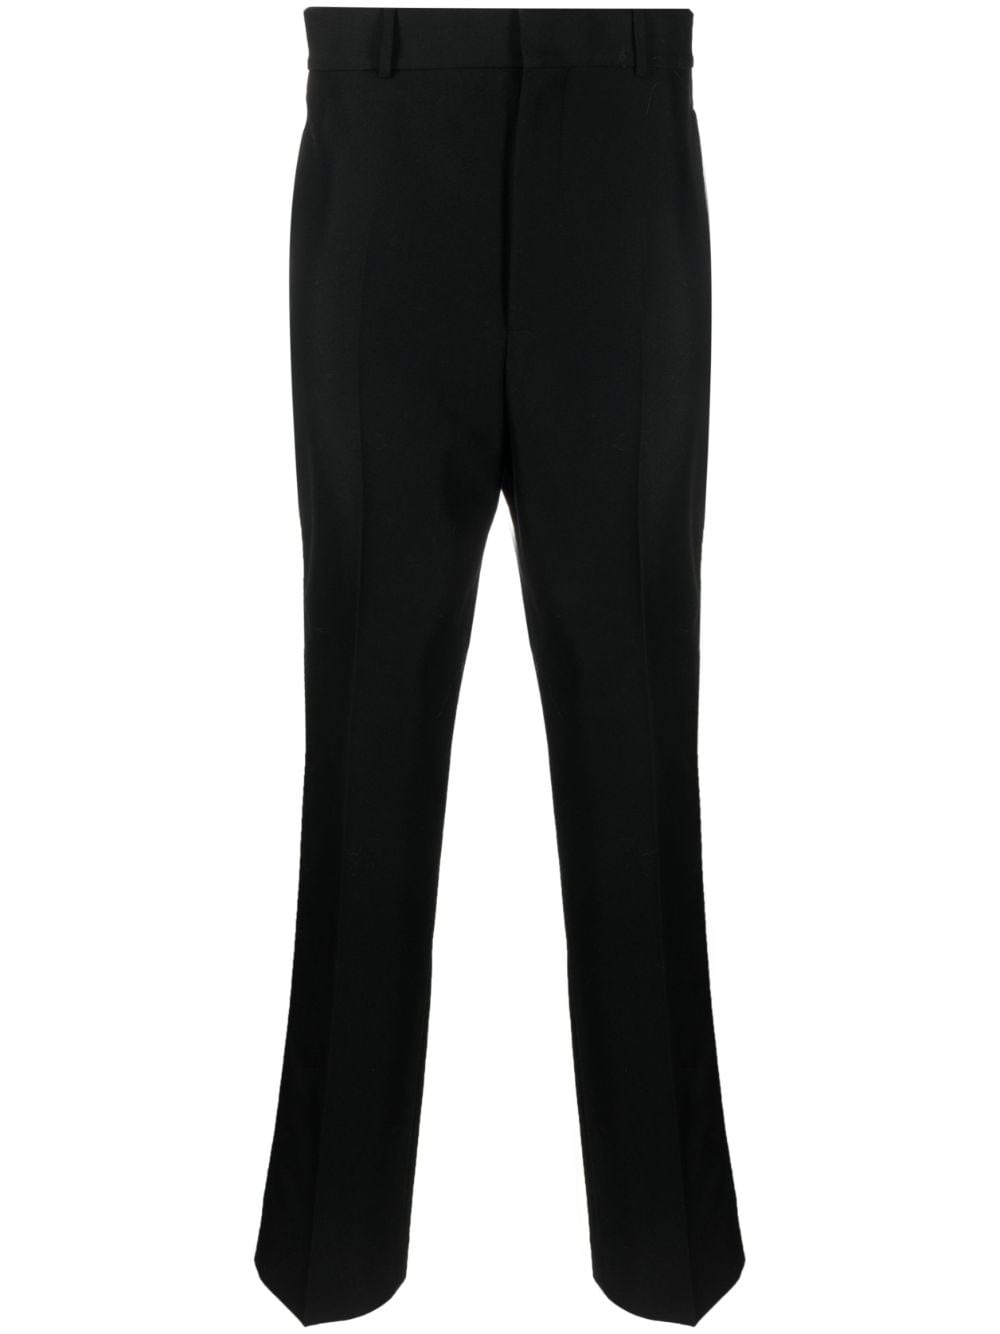 PALM ANGELS Black Cotton Tailored Trousers with Stripe Detail for Men